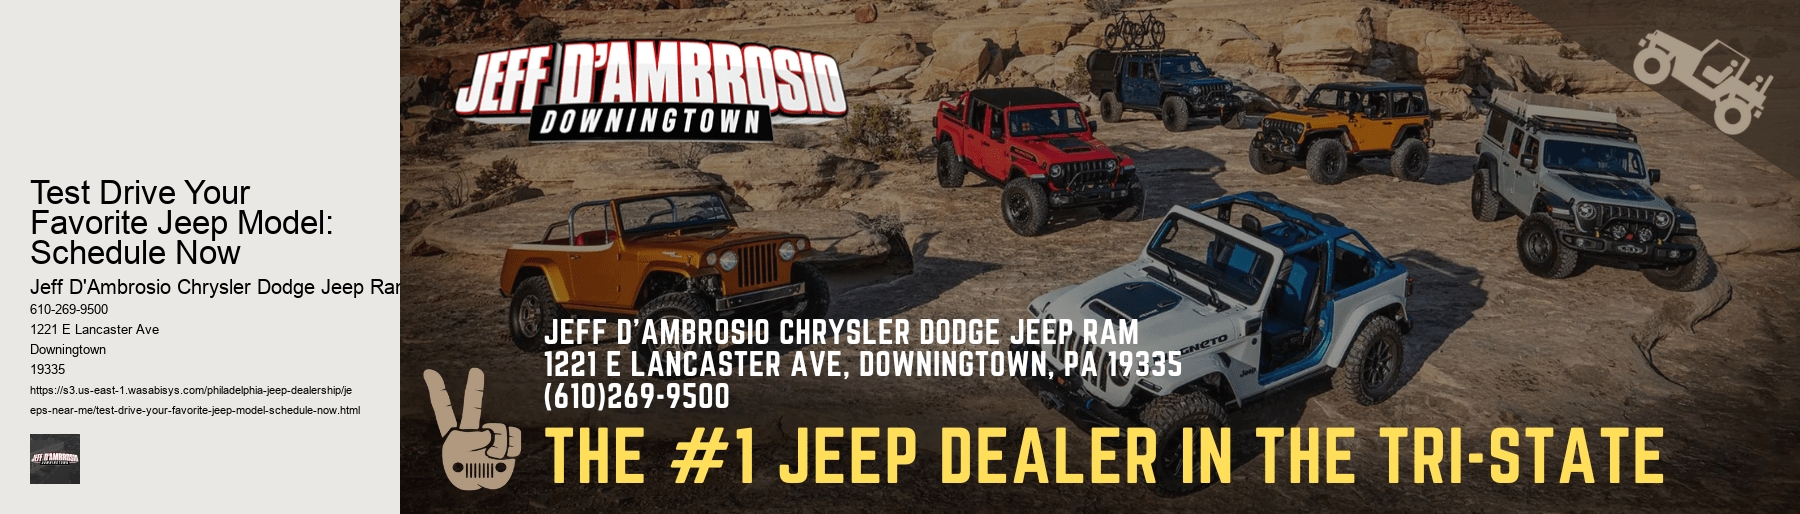 Test Drive Your Favorite Jeep Model: Schedule Now